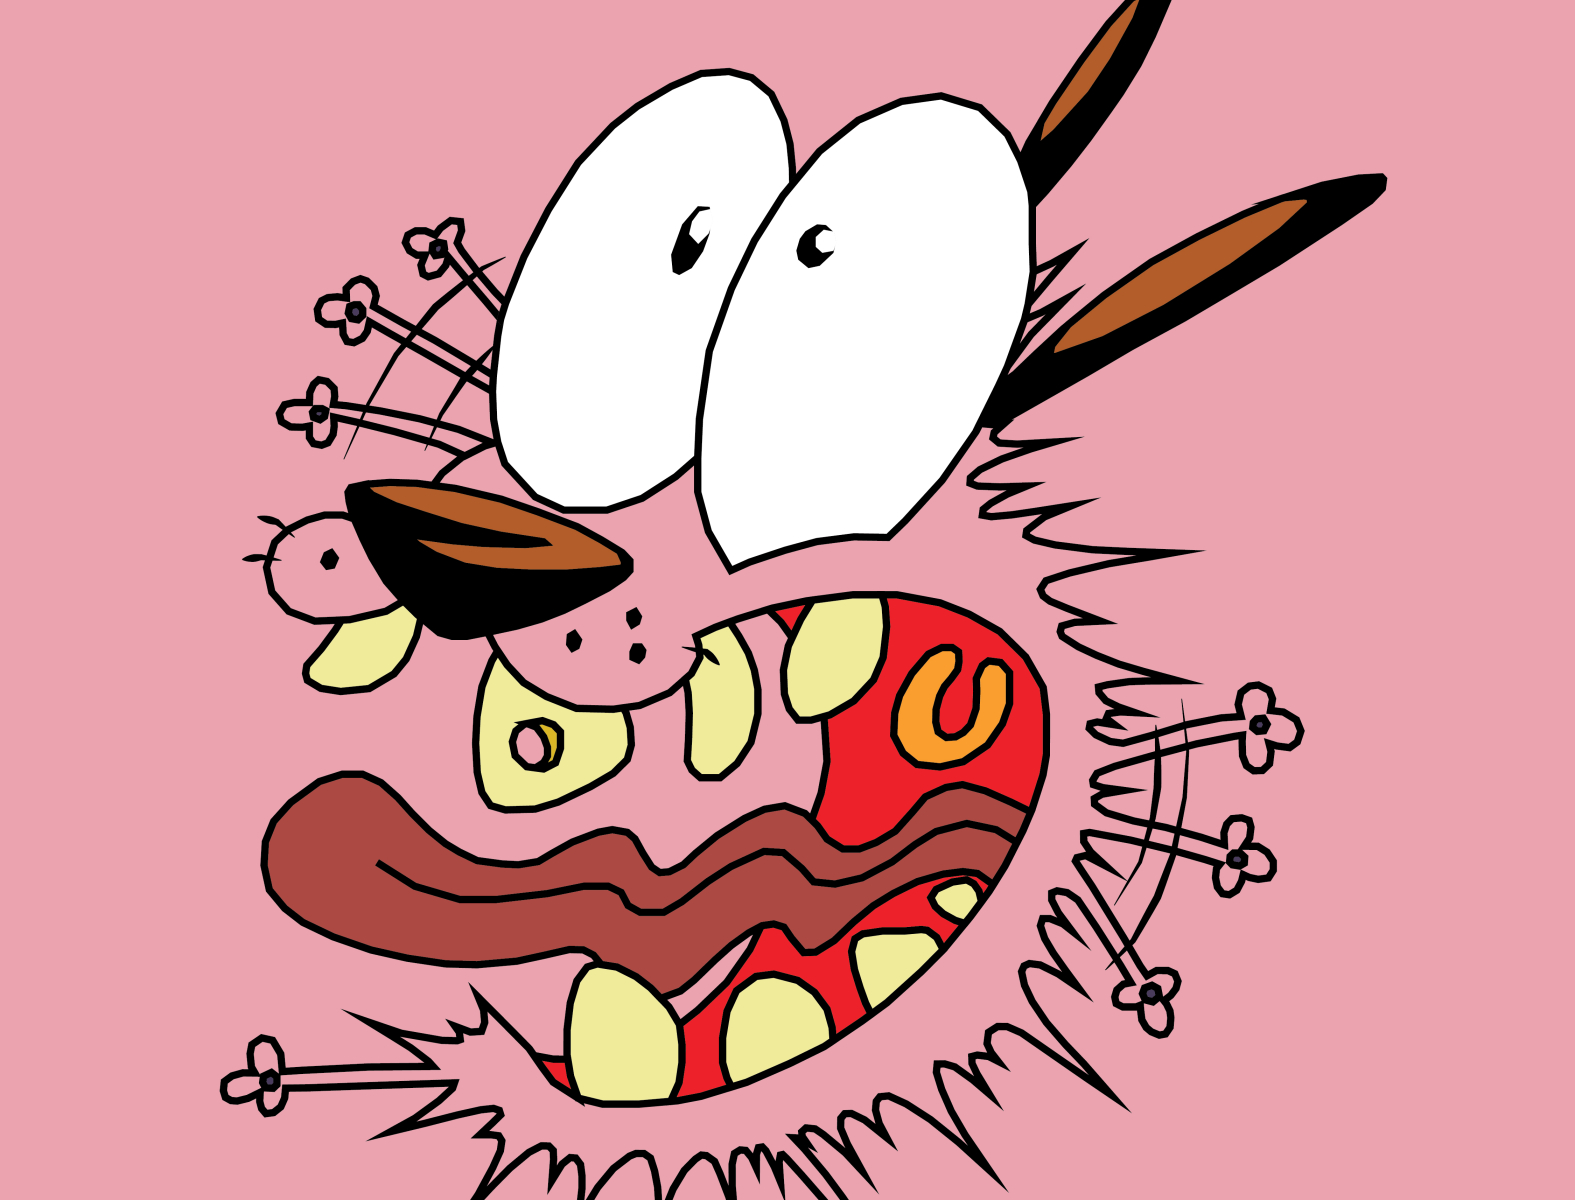 Courage the Cowardly Dog by Jarryd Keuter on Dribbble